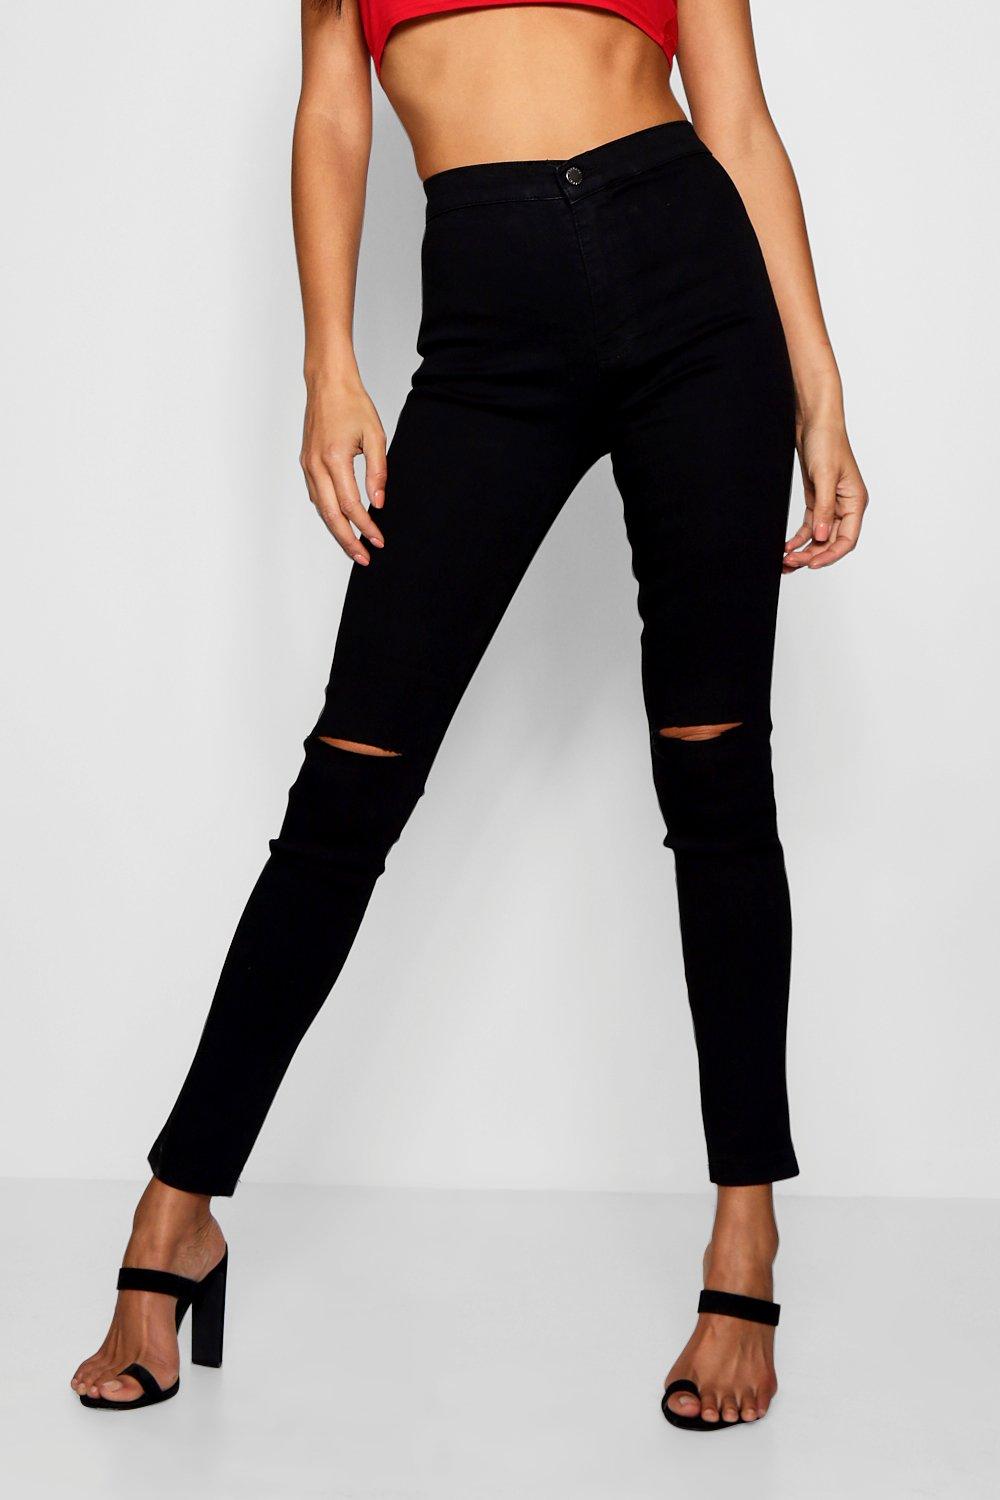 ripped knee black jeans